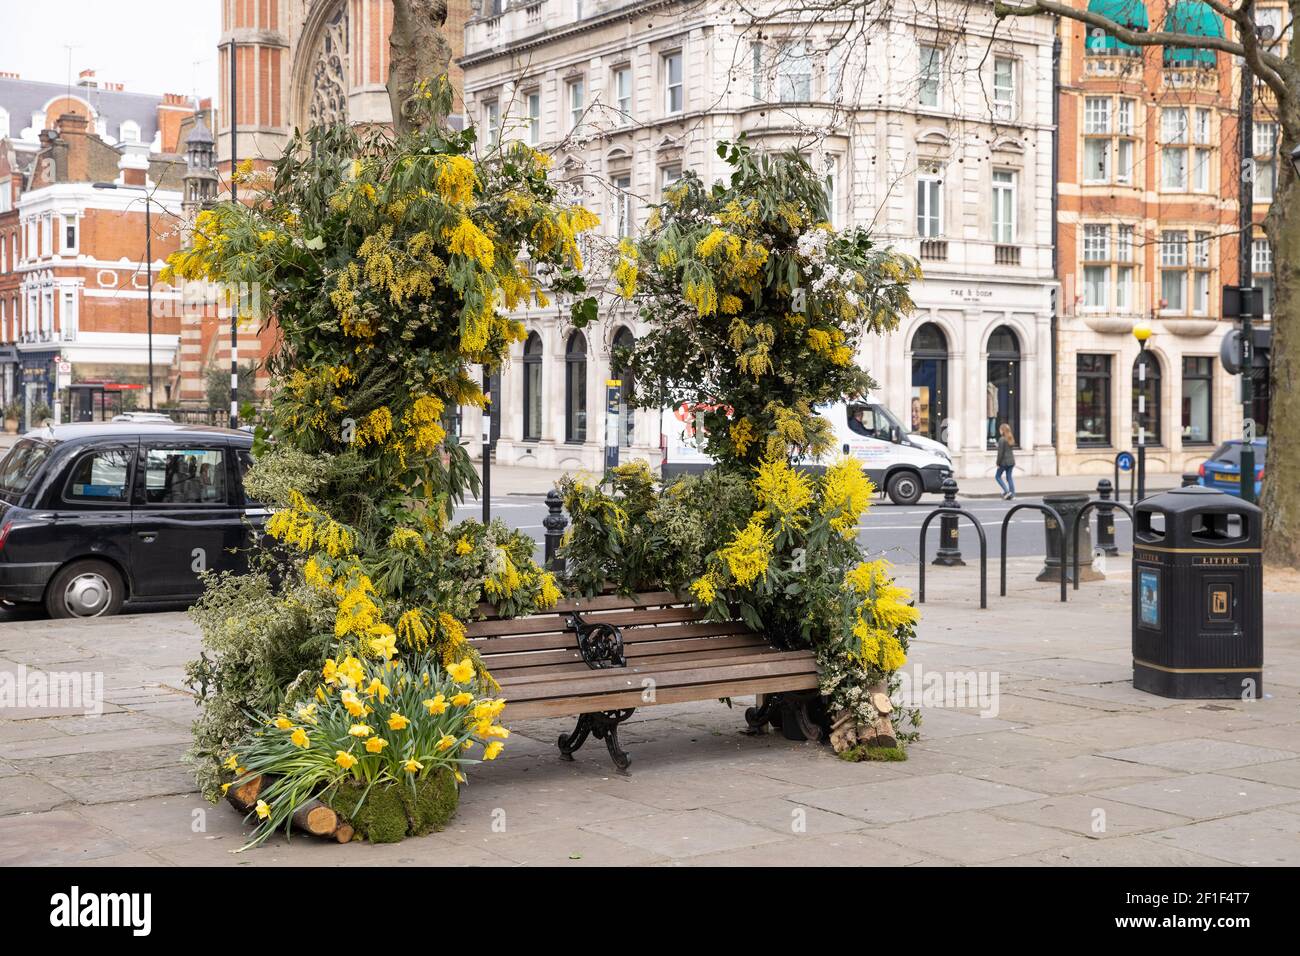 A flower decorated bench.London event florist,  Warren Bushaway, celebrates the International  Women's Day with a Banksy style flower arrangement in Sloane Square. Stock Photo